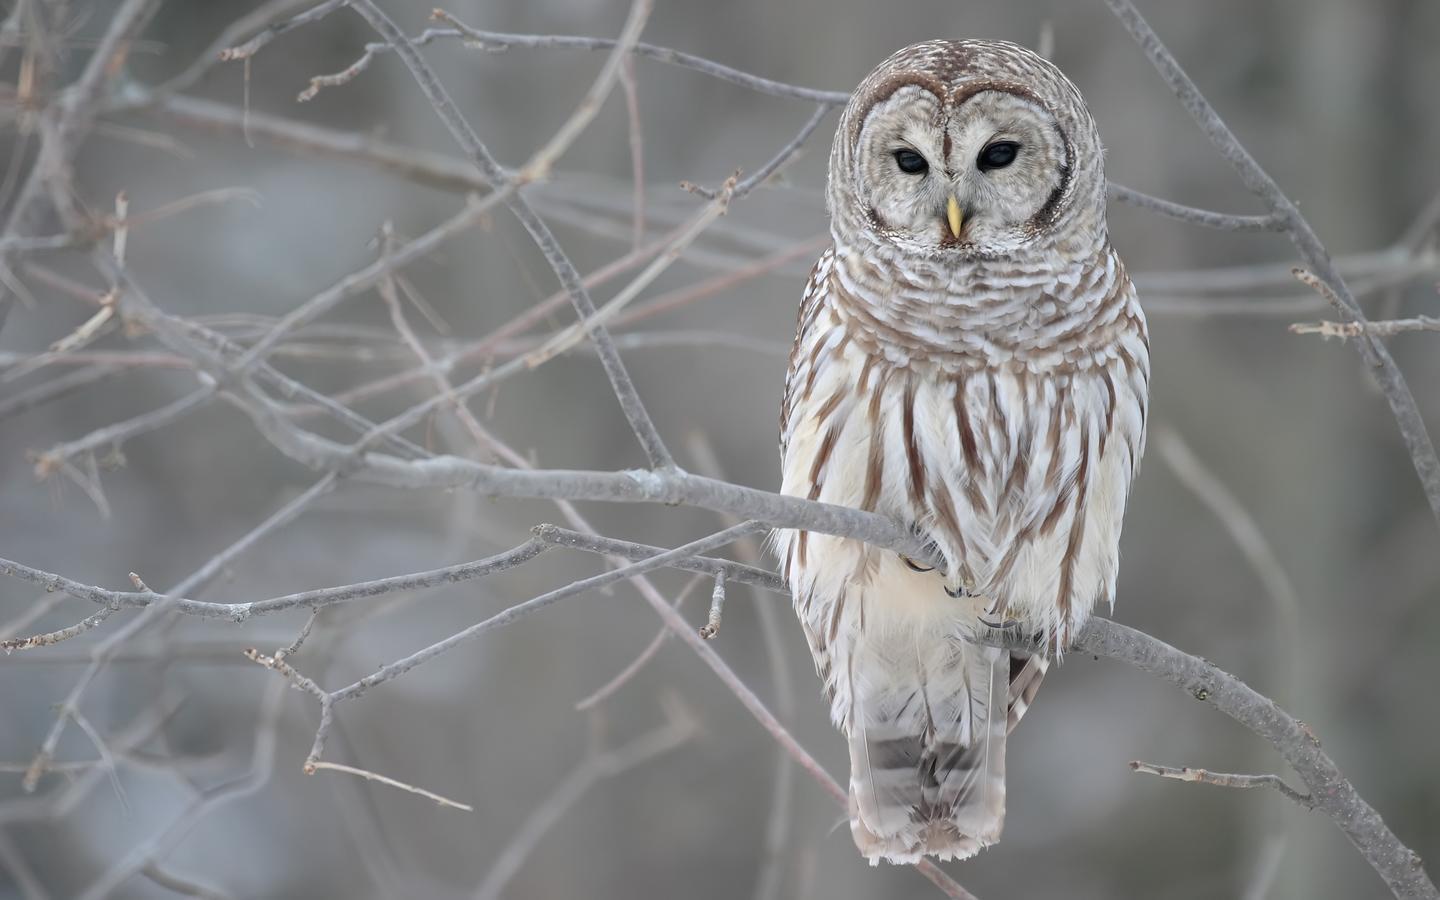 A selection of 10 Image of Owl in HD quality